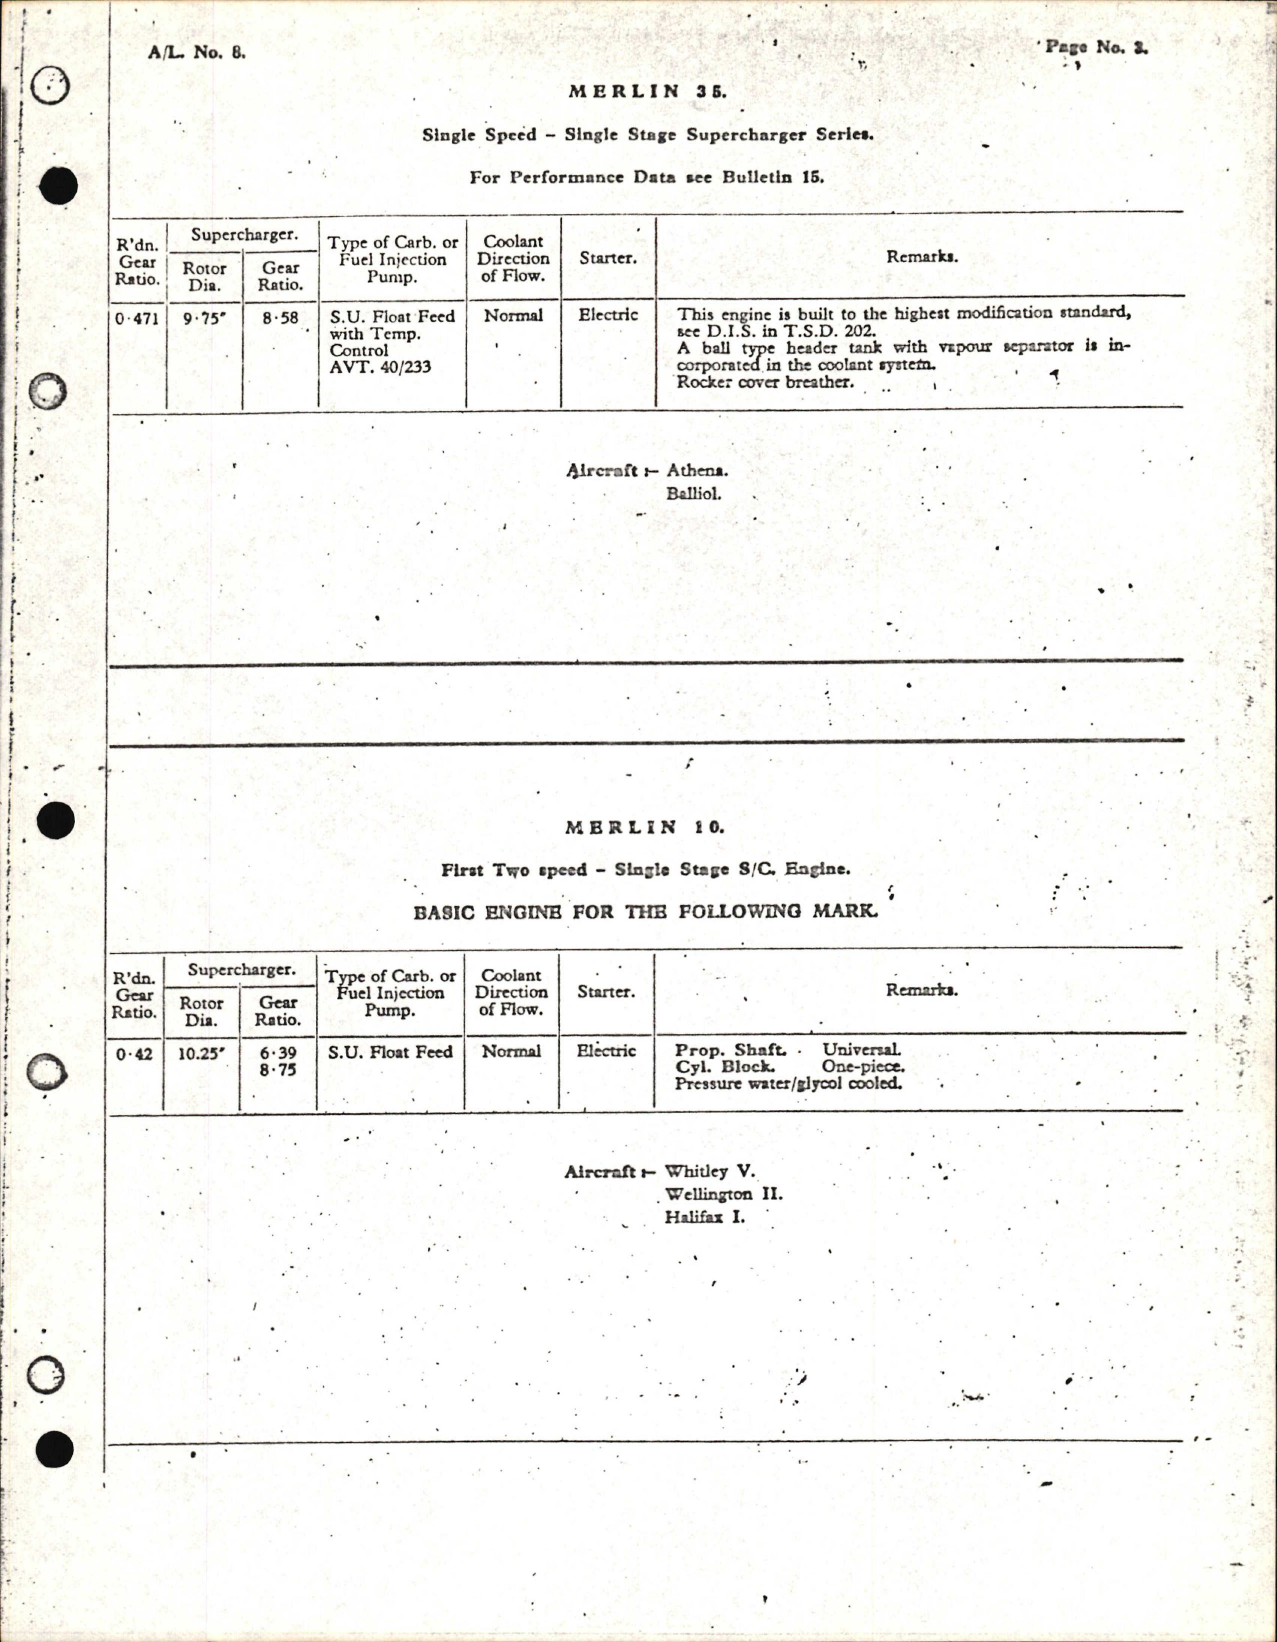 Sample page 5 from AirCorps Library document: Rolls-Royce Aero Service Bulletin - Merlin and Griffon Engine Types